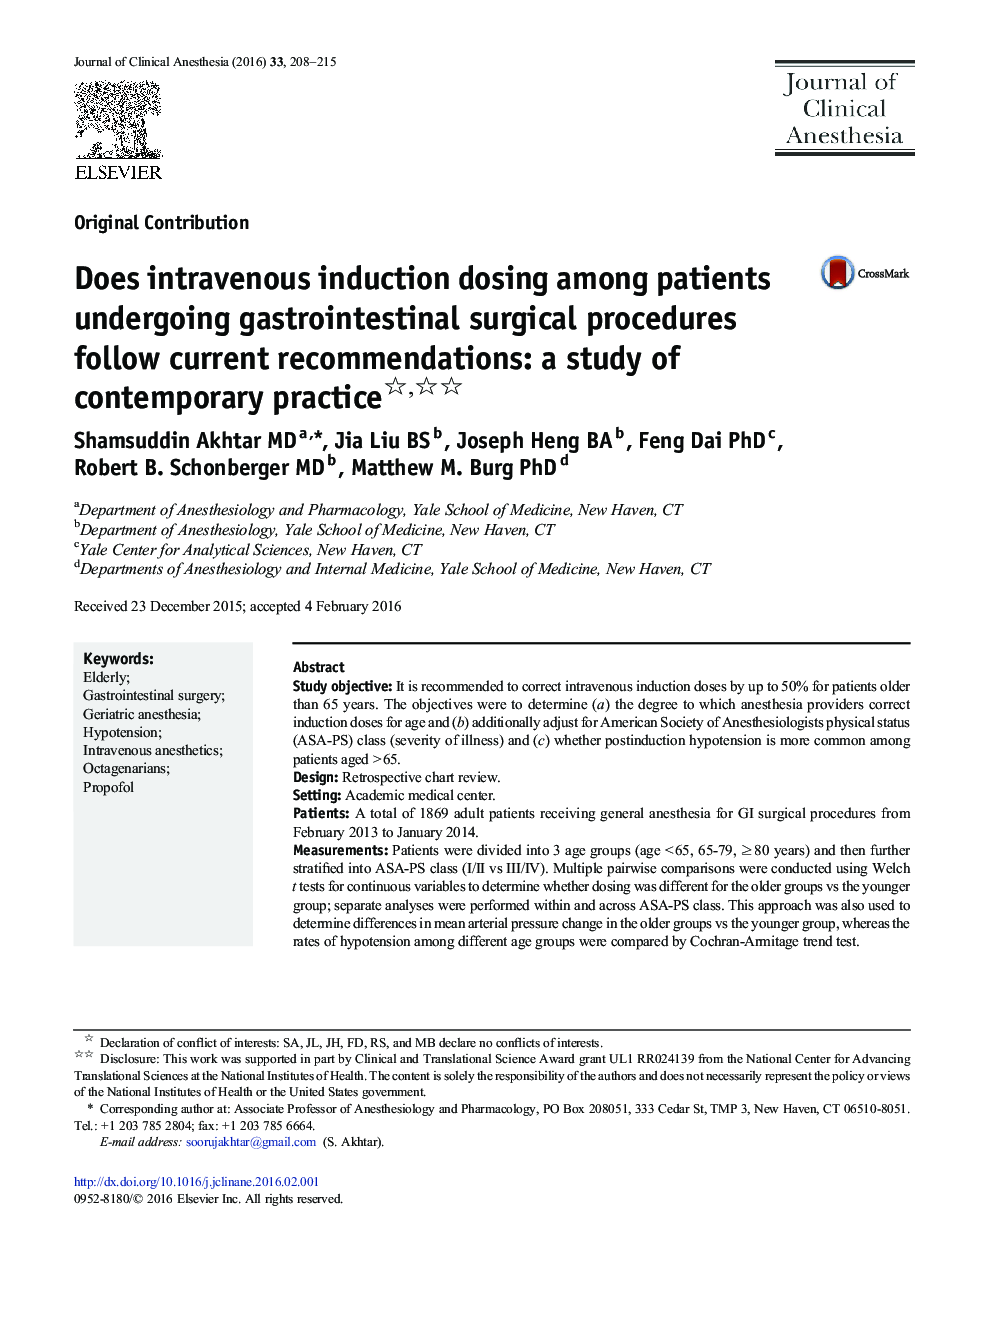 Does intravenous induction dosing among patients undergoing gastrointestinal surgical procedures follow current recommendations: a study of contemporary practice 